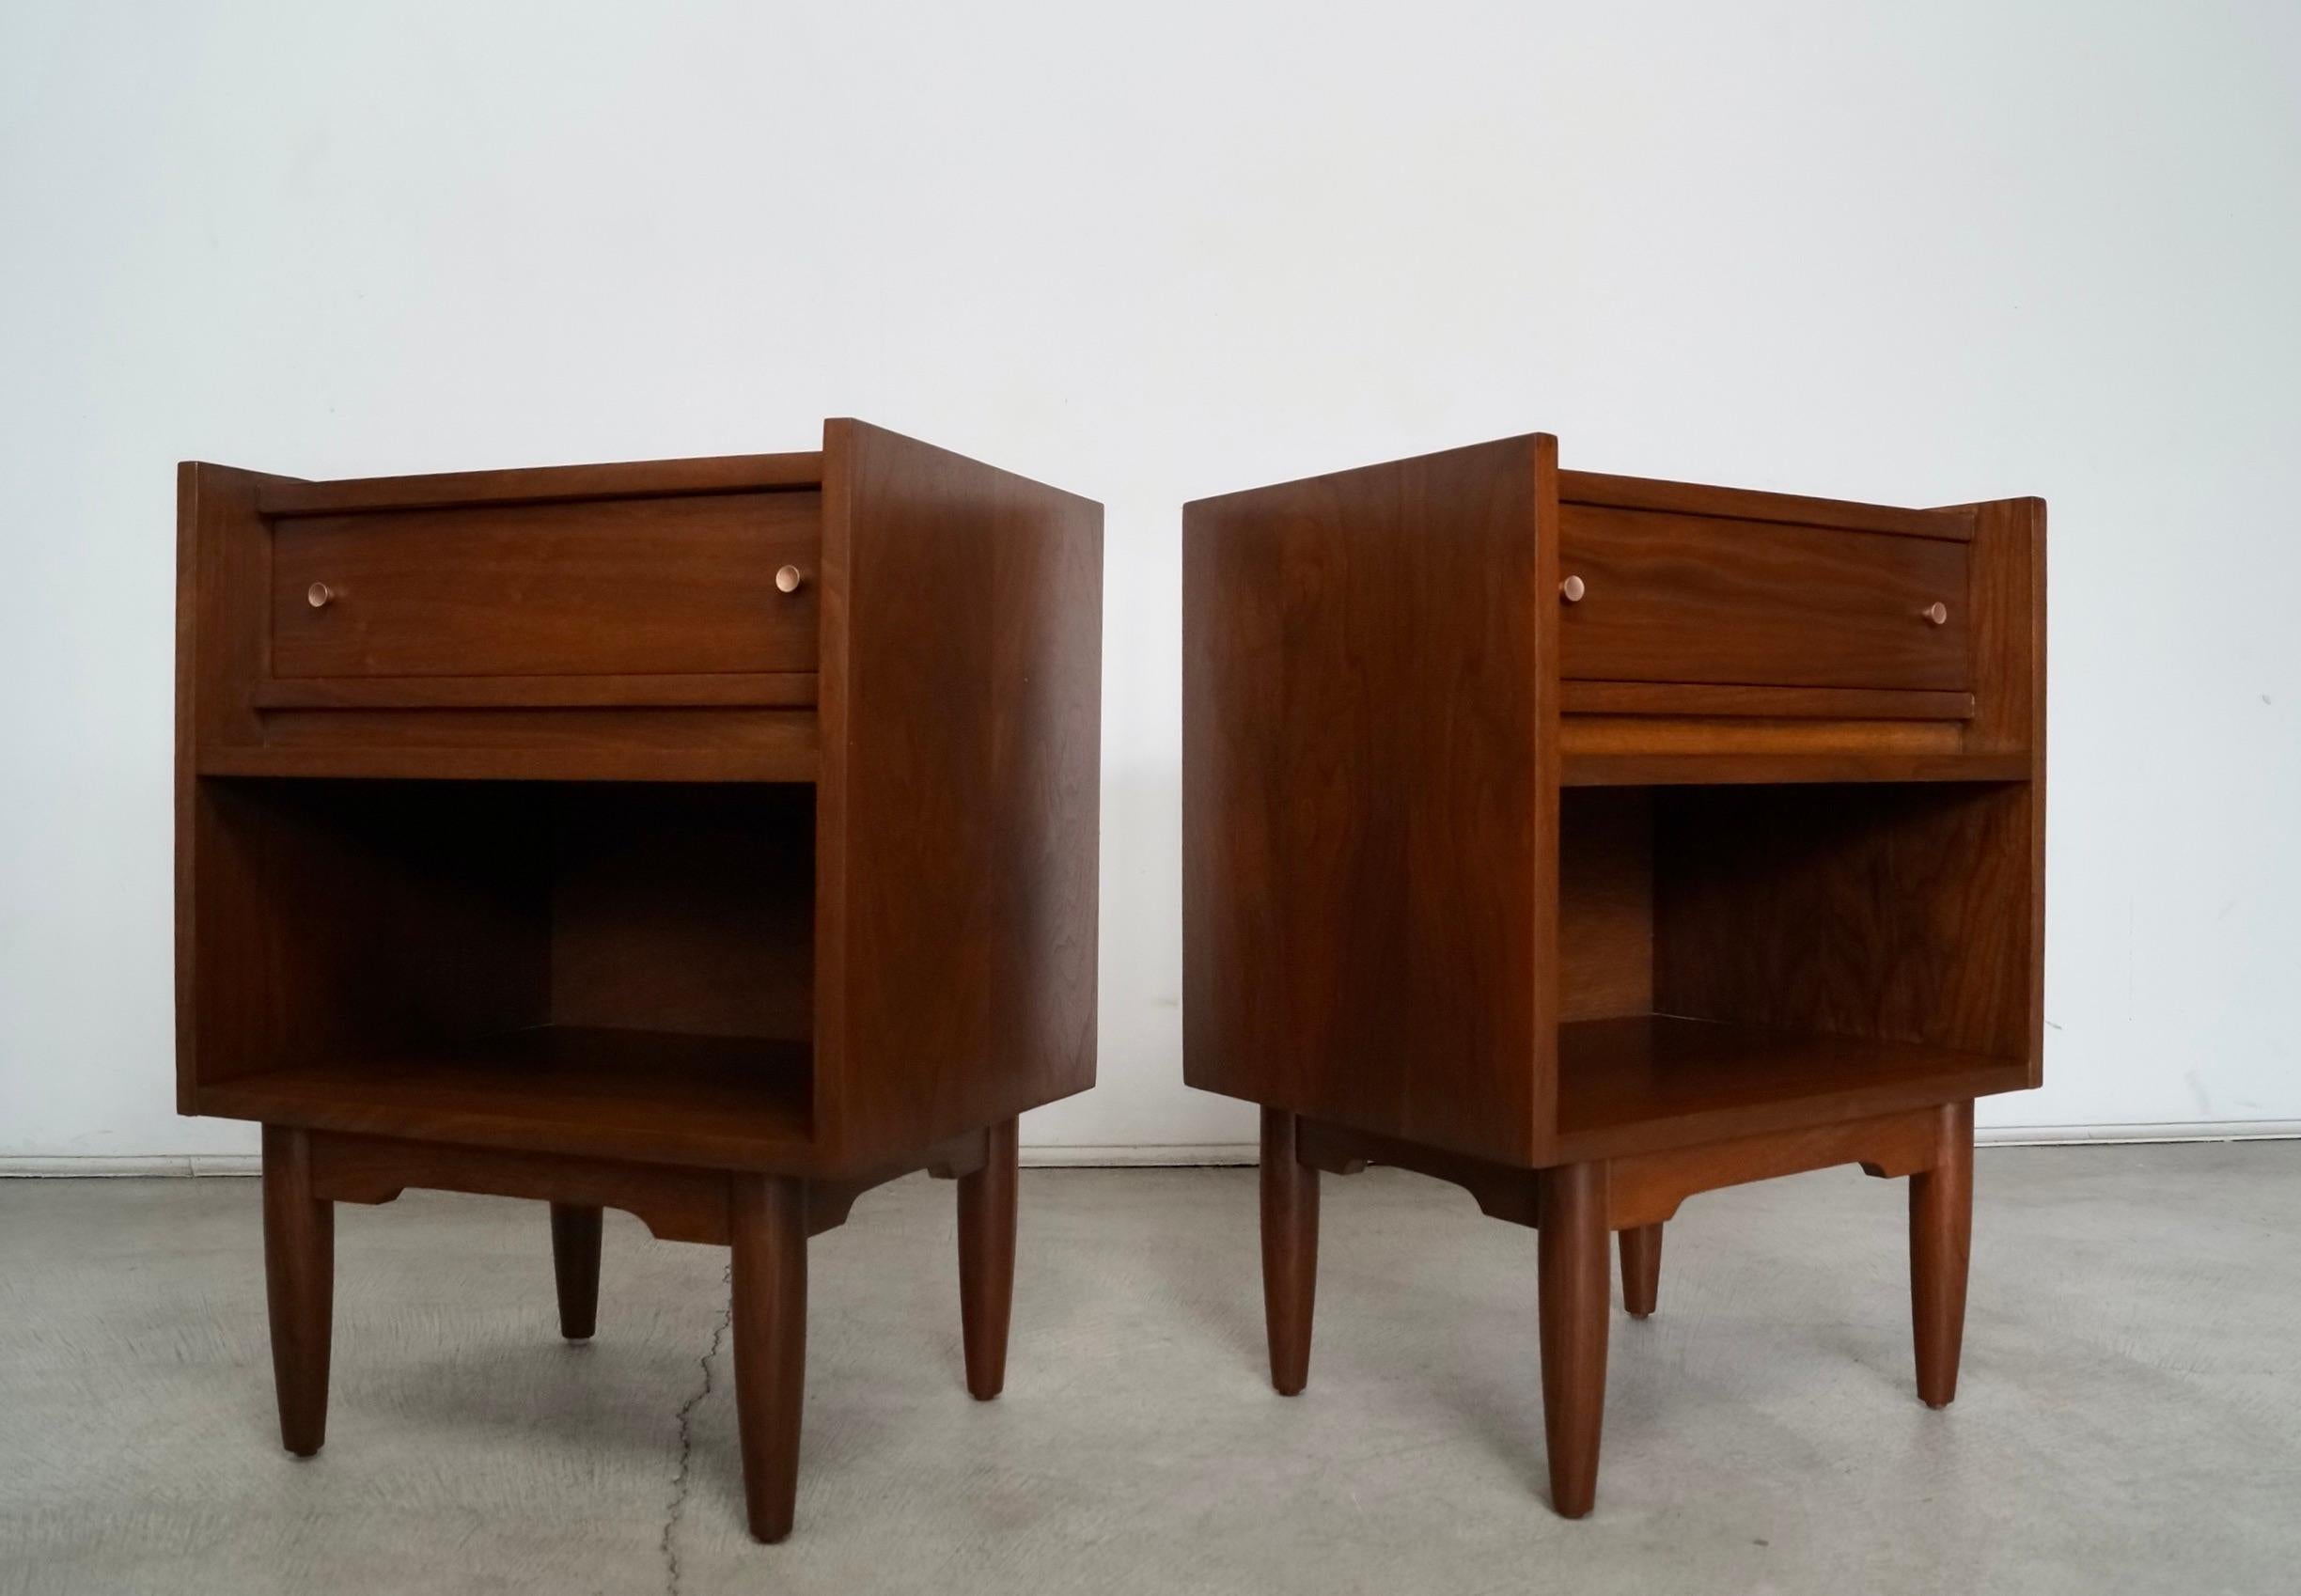 1960's Mid-Century Modern Walnut Nightstands - a Pair For Sale 2